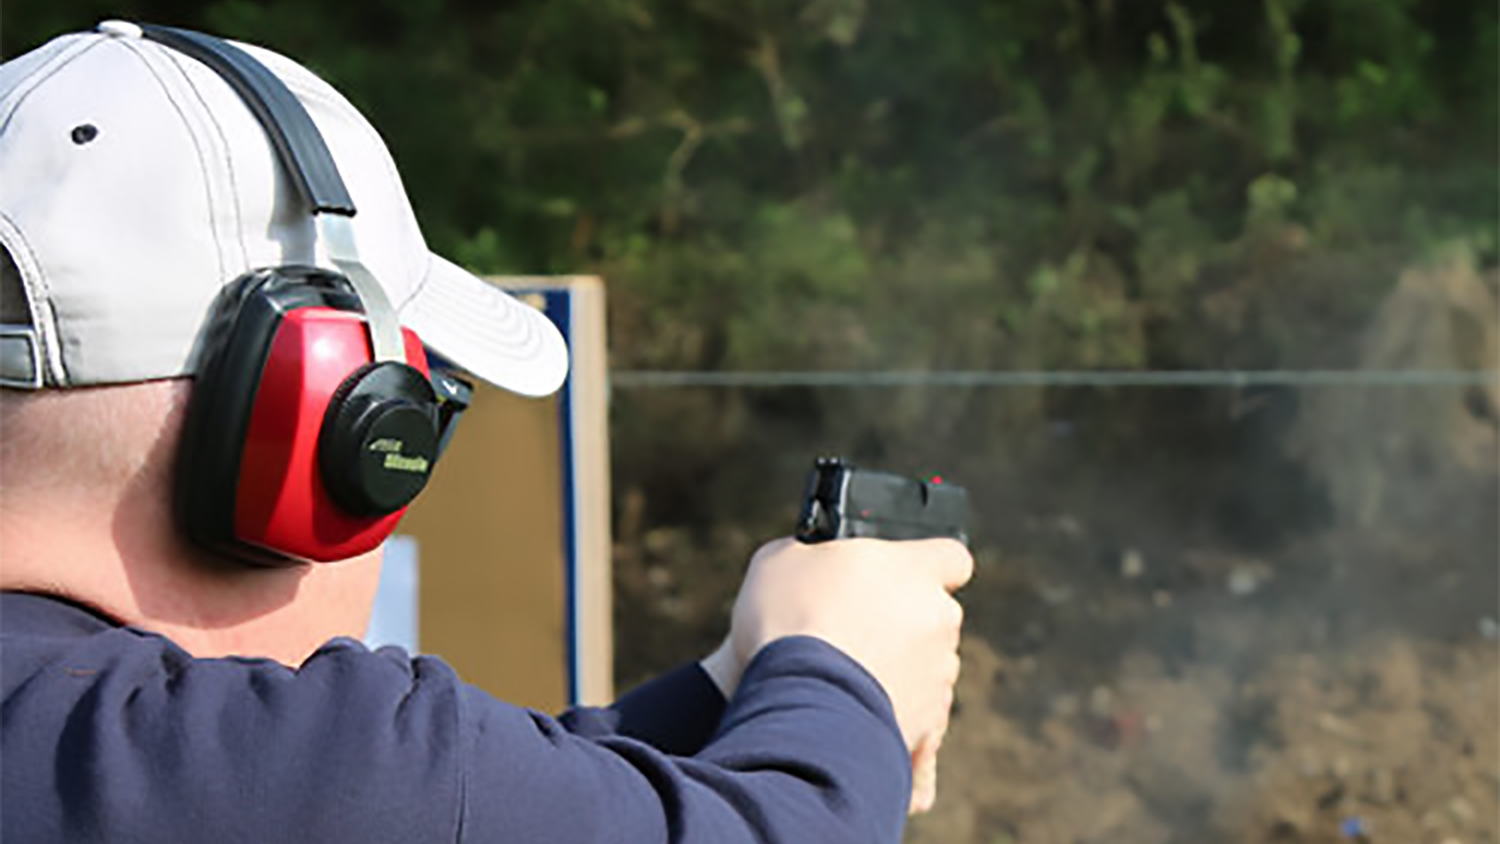 EllwoodCity.org: BC3 Offers NRA Basic Pistol Shooting Courses This Summer